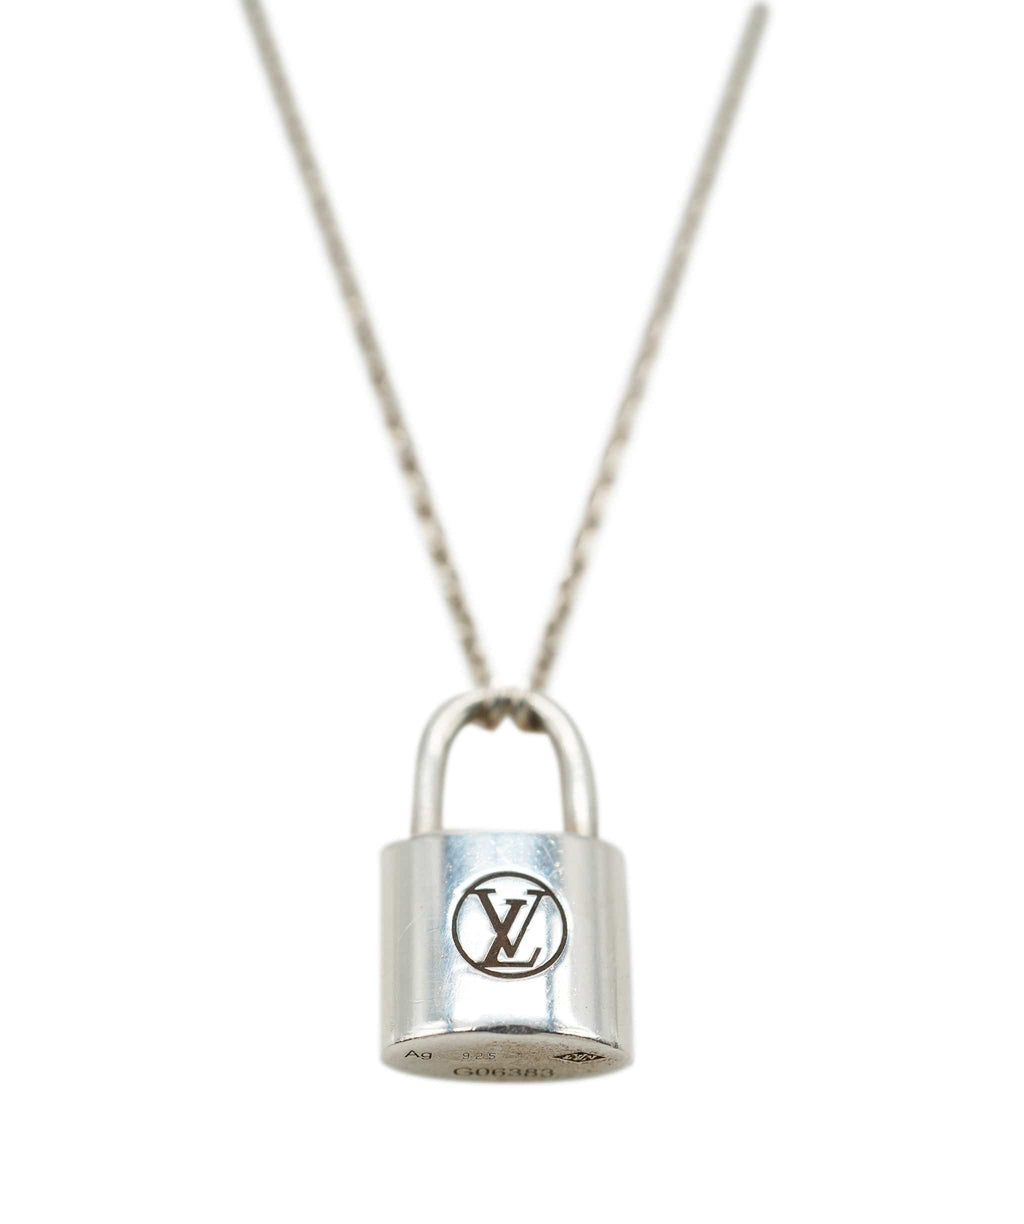 Japan Used NecklaceLouis Vuitton Collier Chain Pin Lock Necklace Silver  Mono  eBay